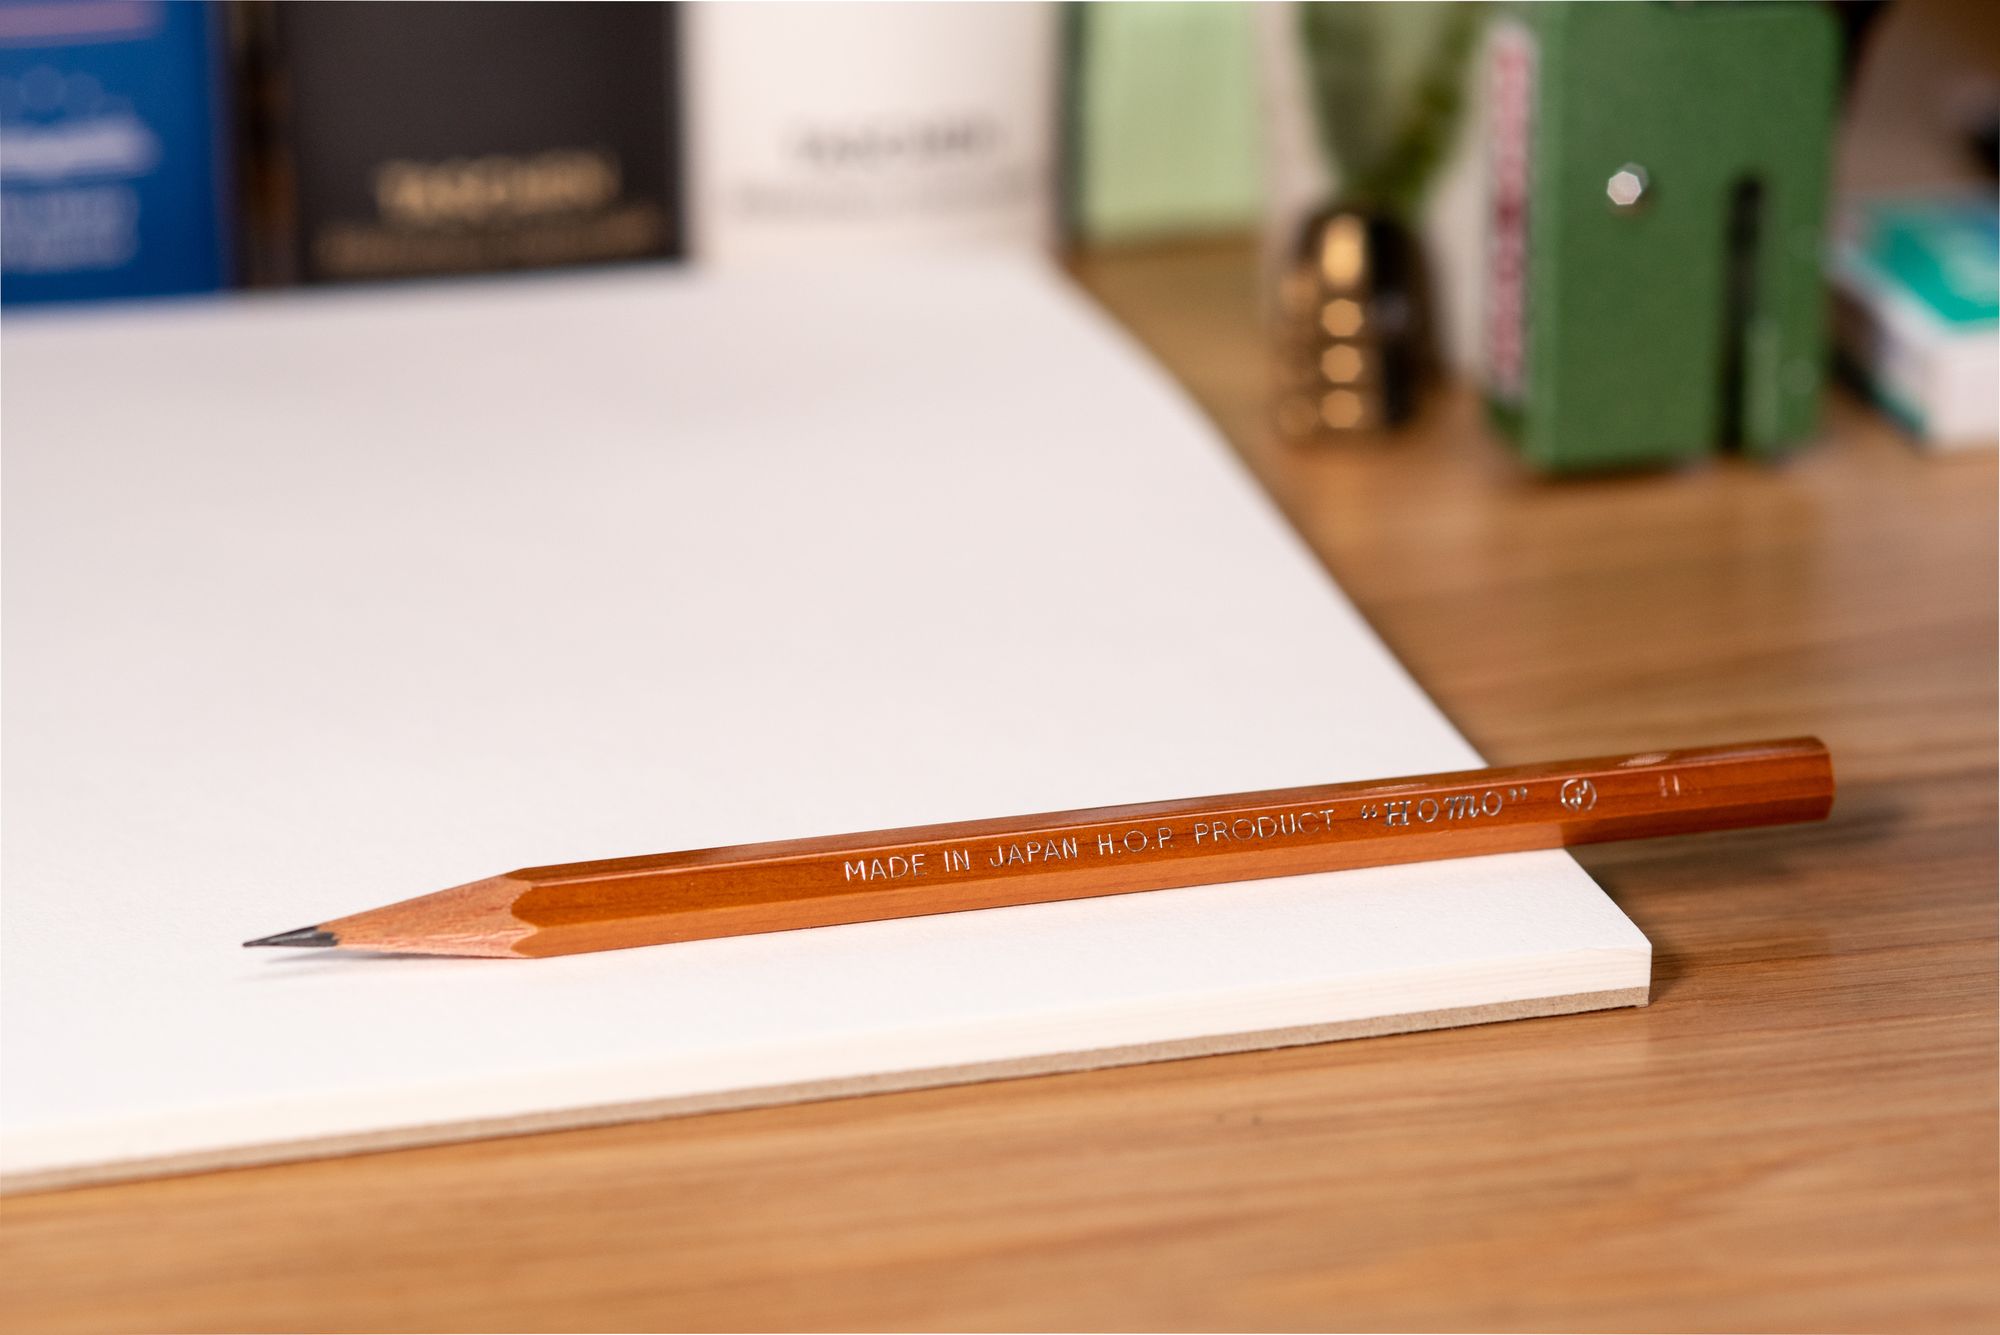 Mechanical Pencils vs Wooden Pencils - Which Are Better? - DEVELOP LEARN  GROW